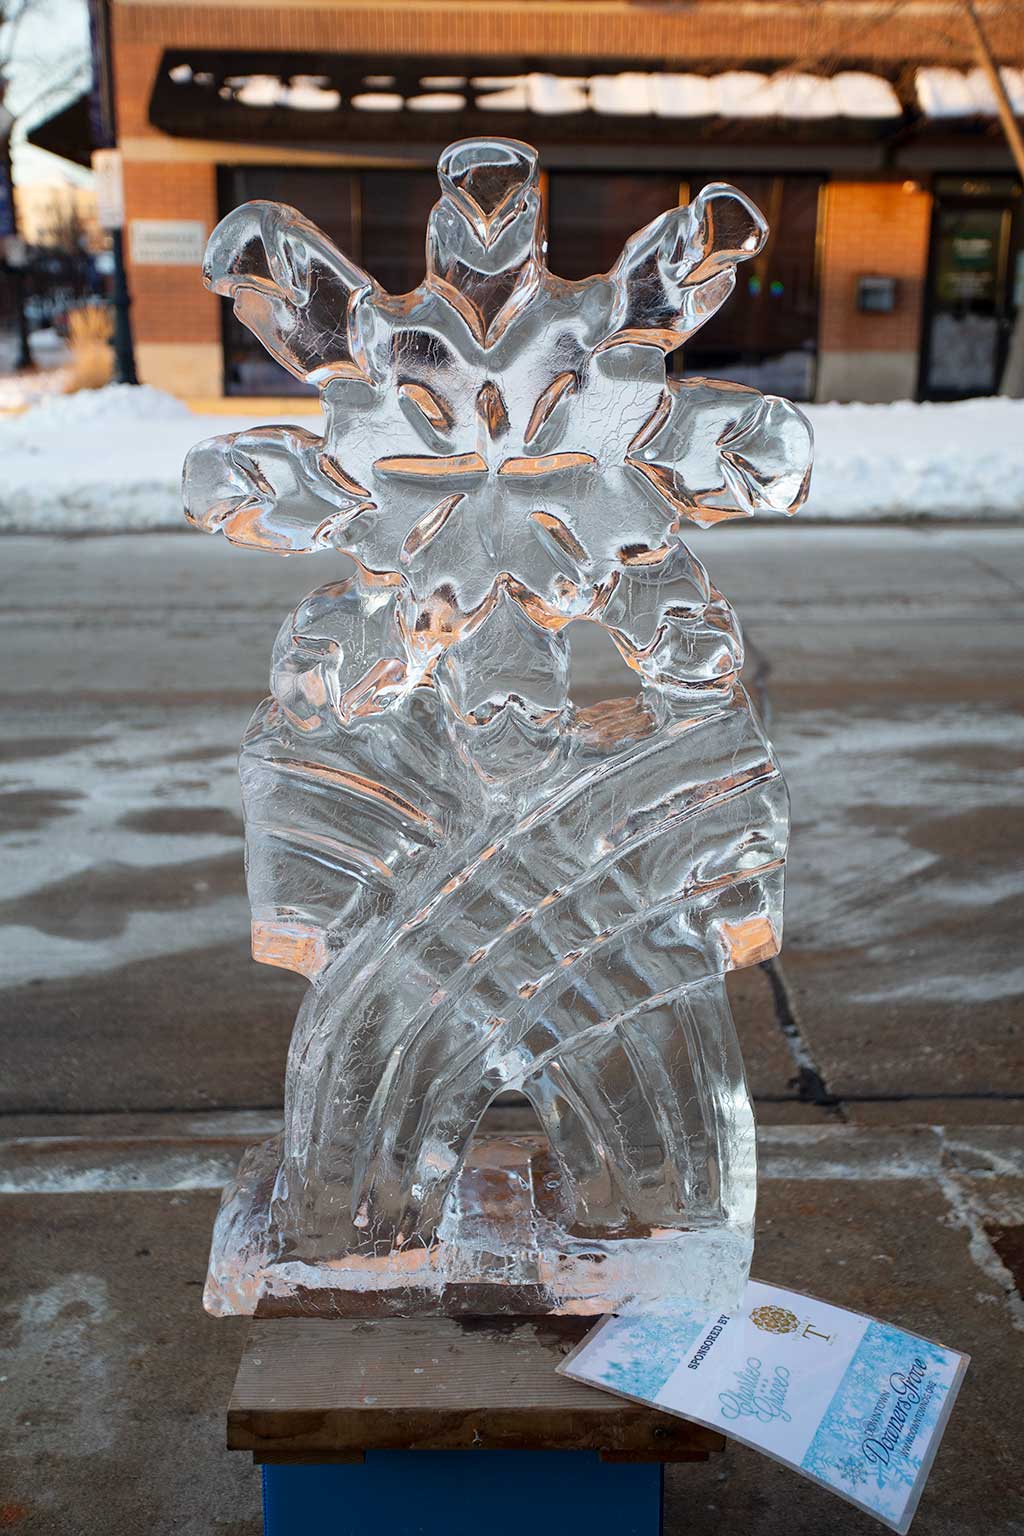 drive-swim-fly-downers-grove-chicago-illinois-ice-sculpture-downtown-businesses-snow-flake